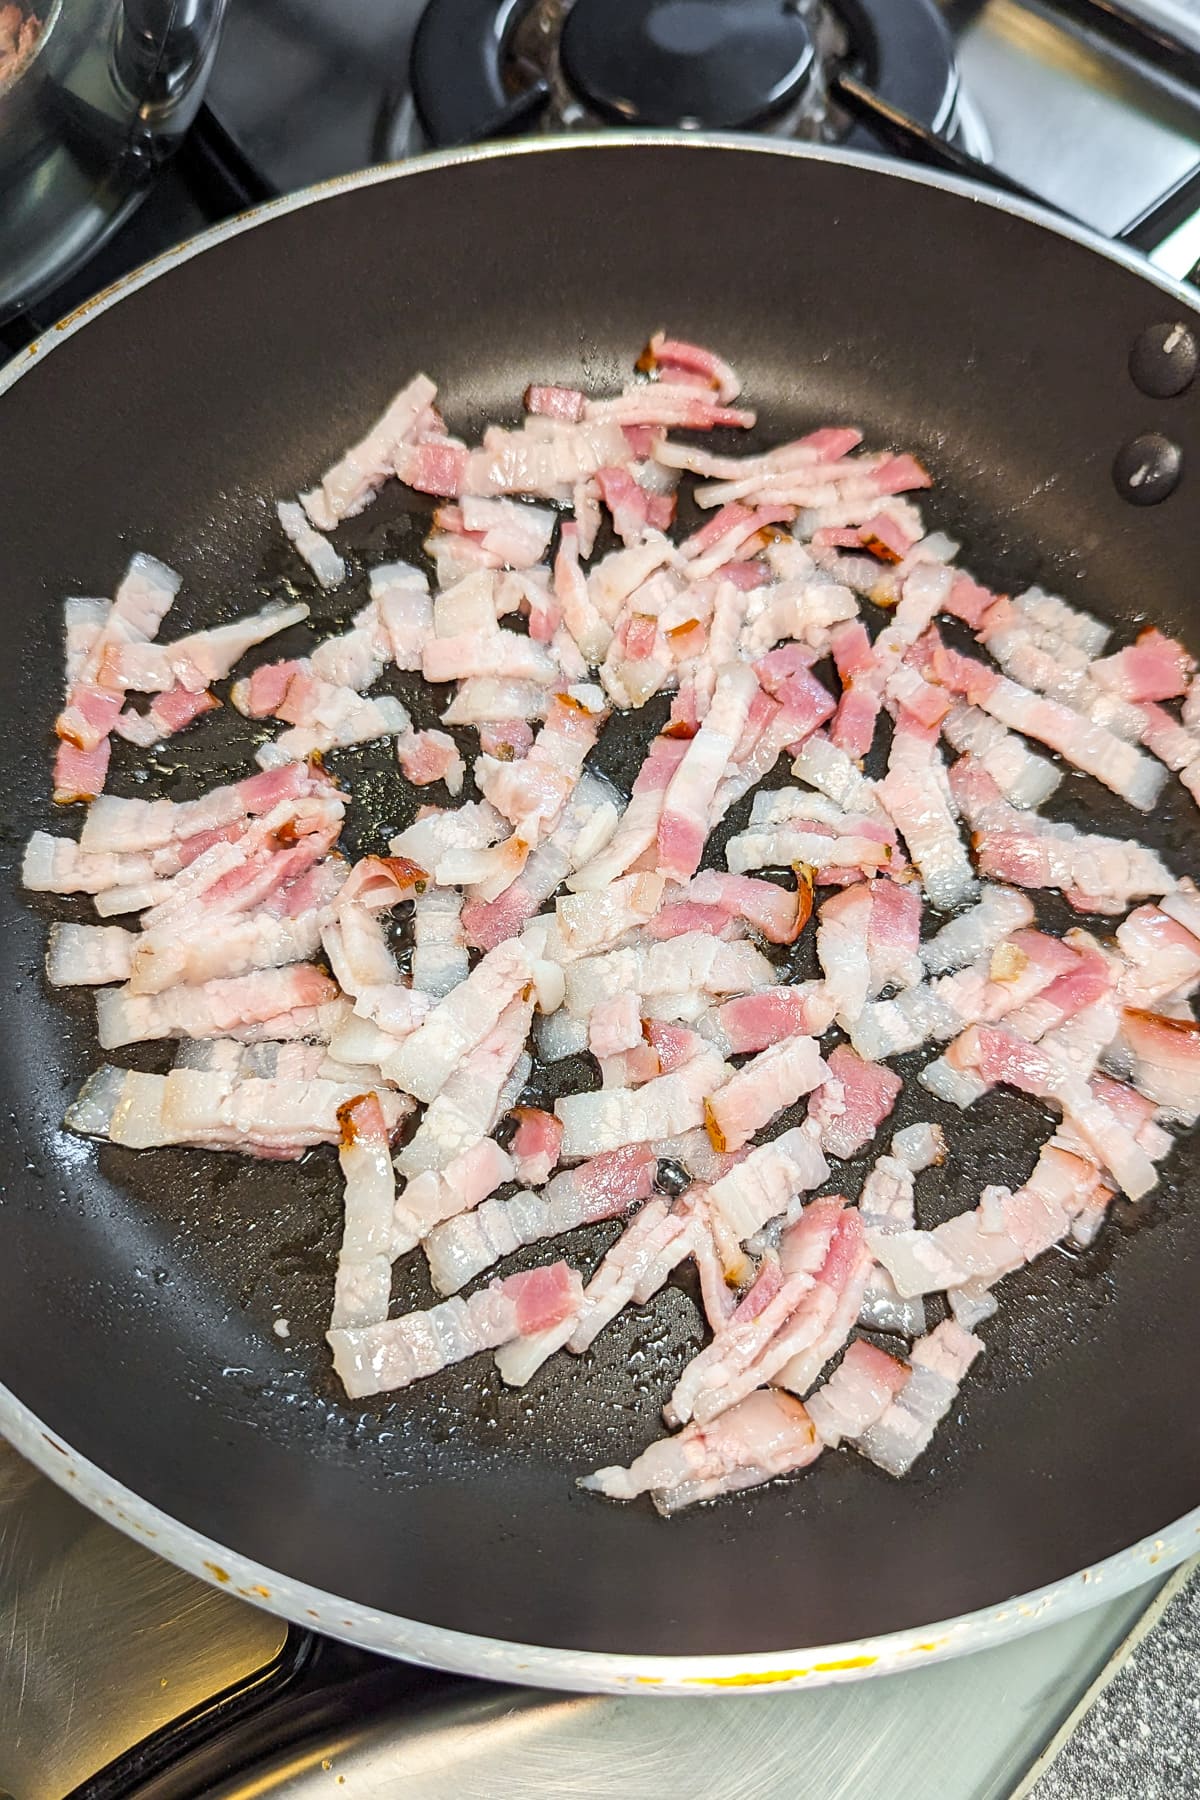 A frying pan with sliced bacon pieces frying on the stove.